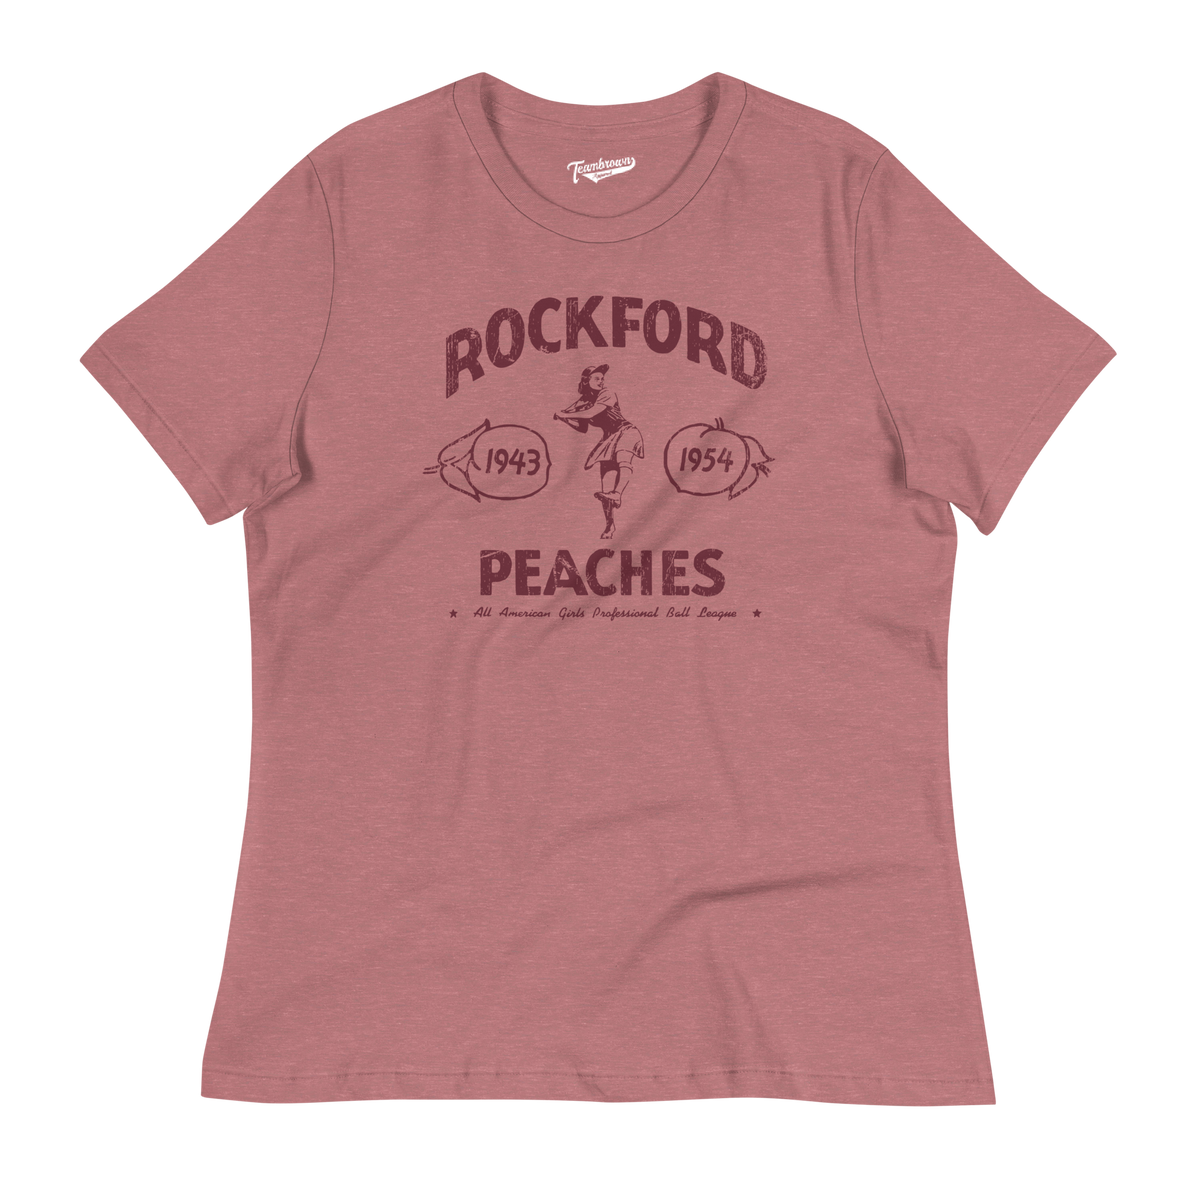 Rockford Peaches Program - Women's Relaxed Fit T-Shirt | Officially Licensed - AAGPBL